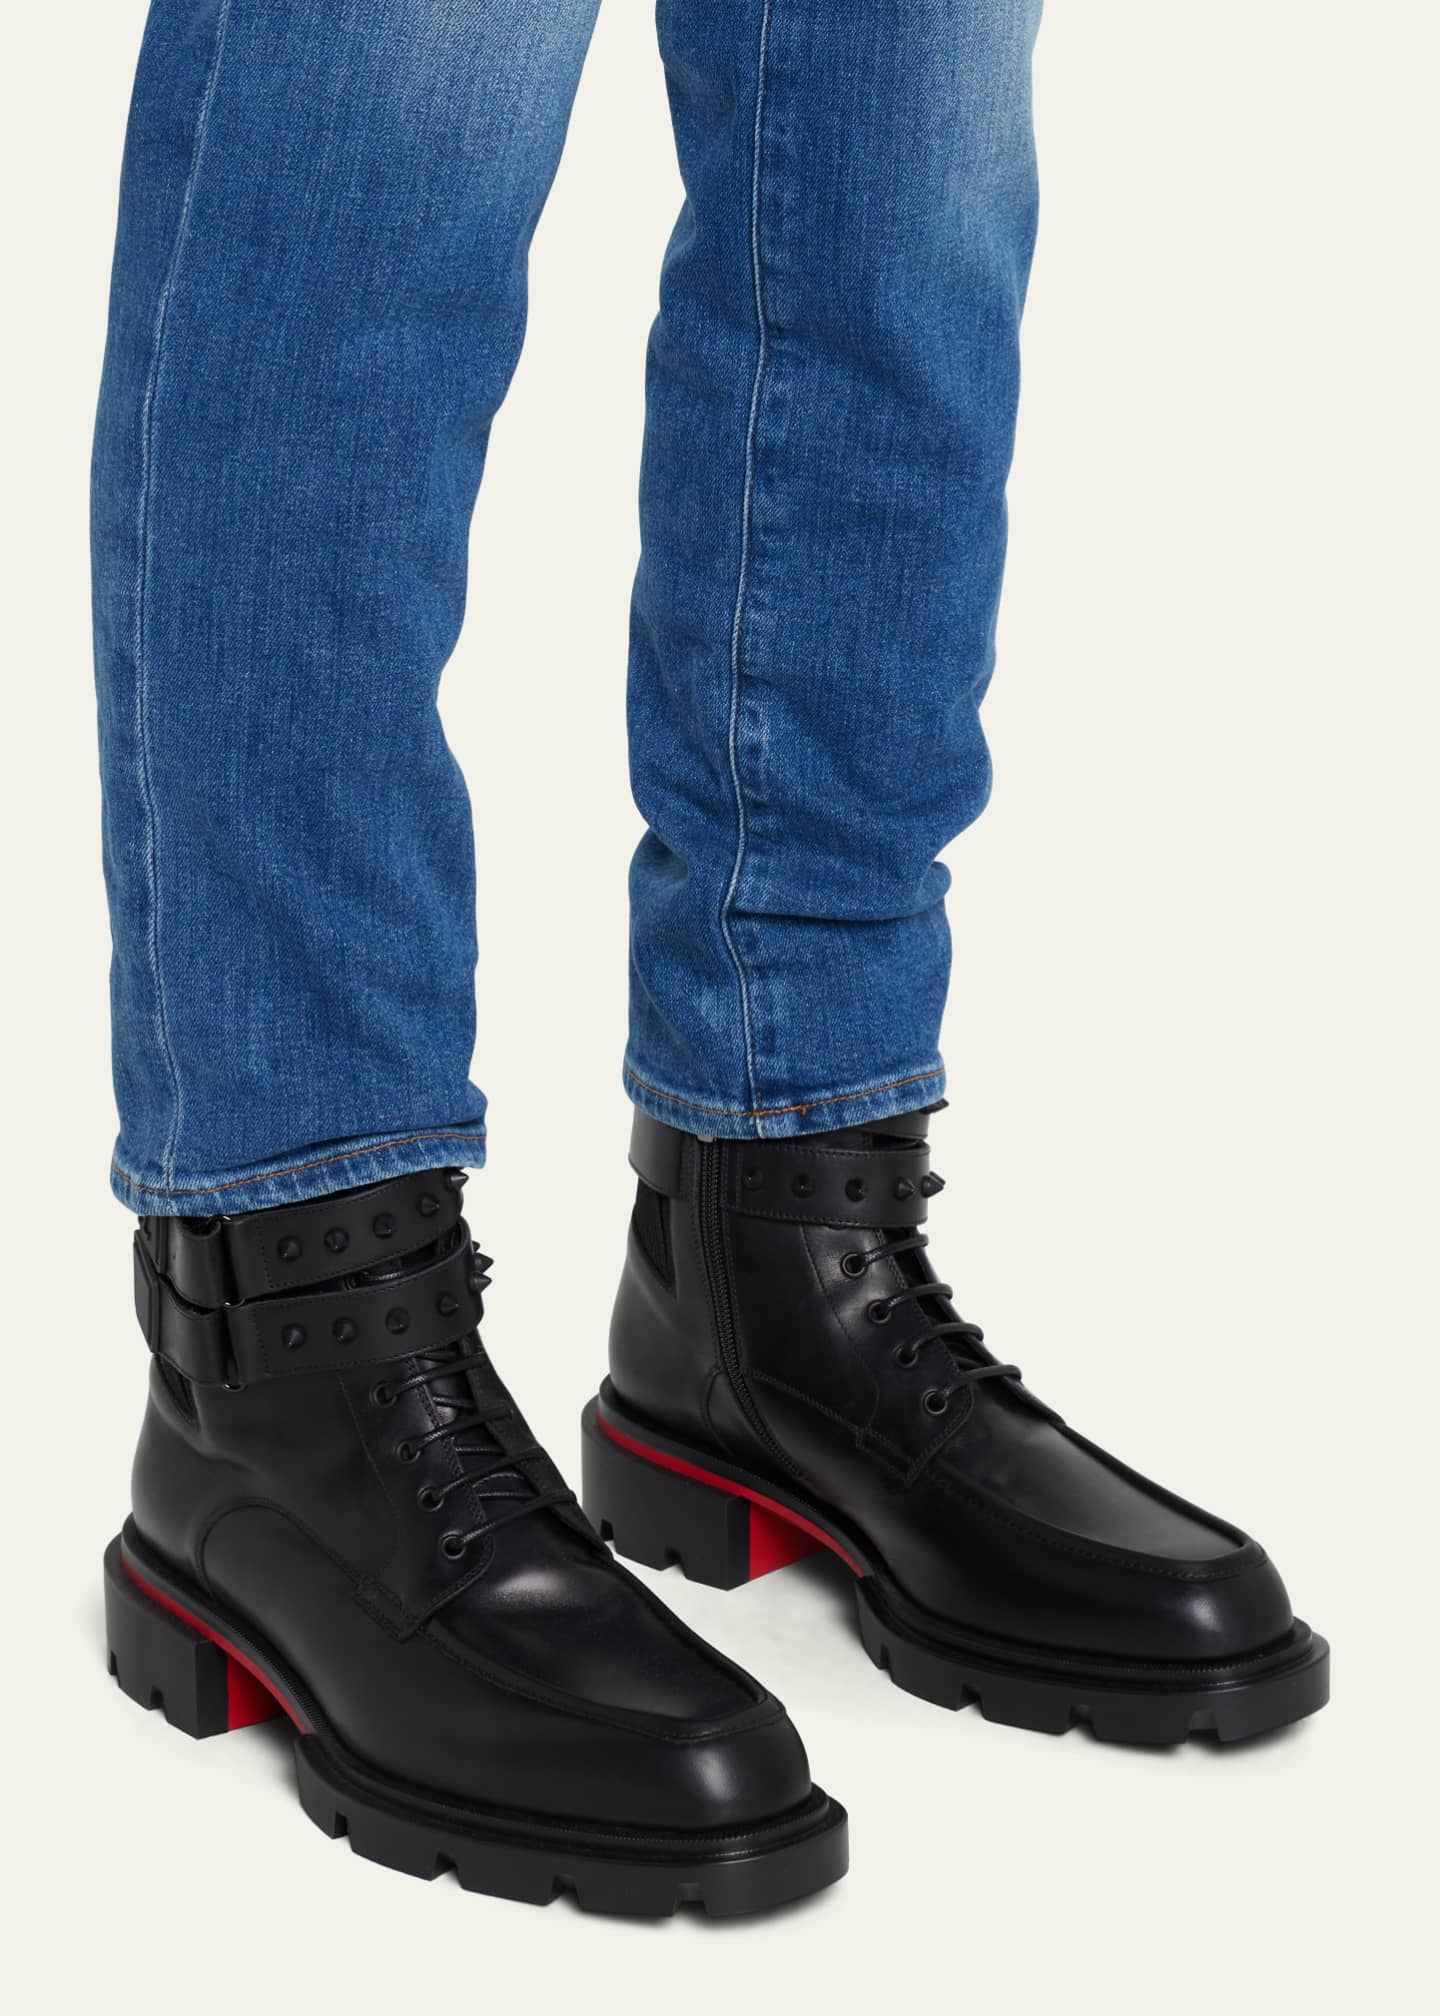 Shoes, at - Wheretoget  Christian louboutin shoes, Christian louboutin  boots, Christian louboutin